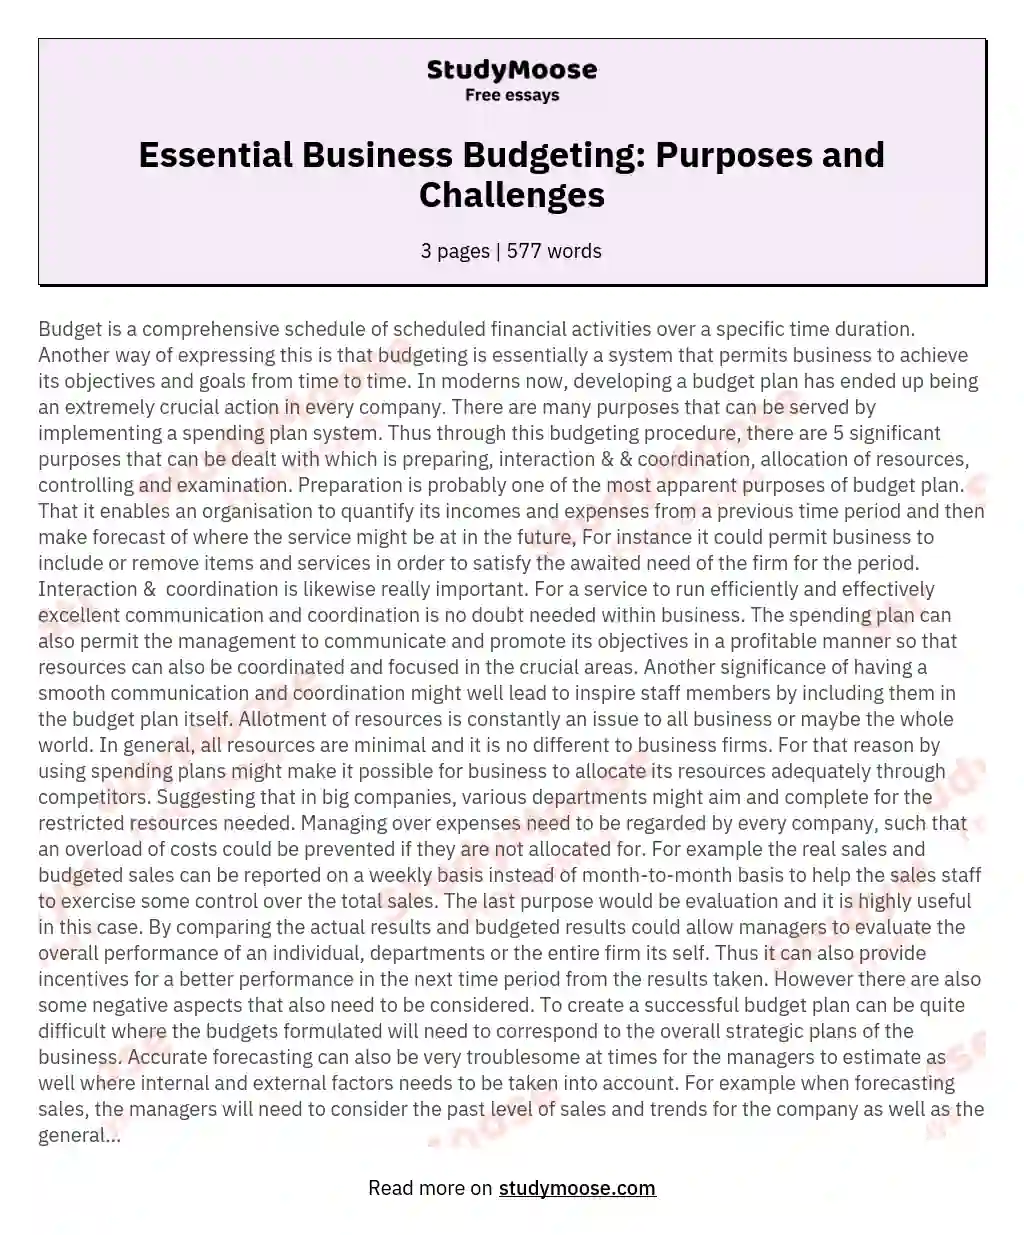 Essential Business Budgeting: Purposes and Challenges essay